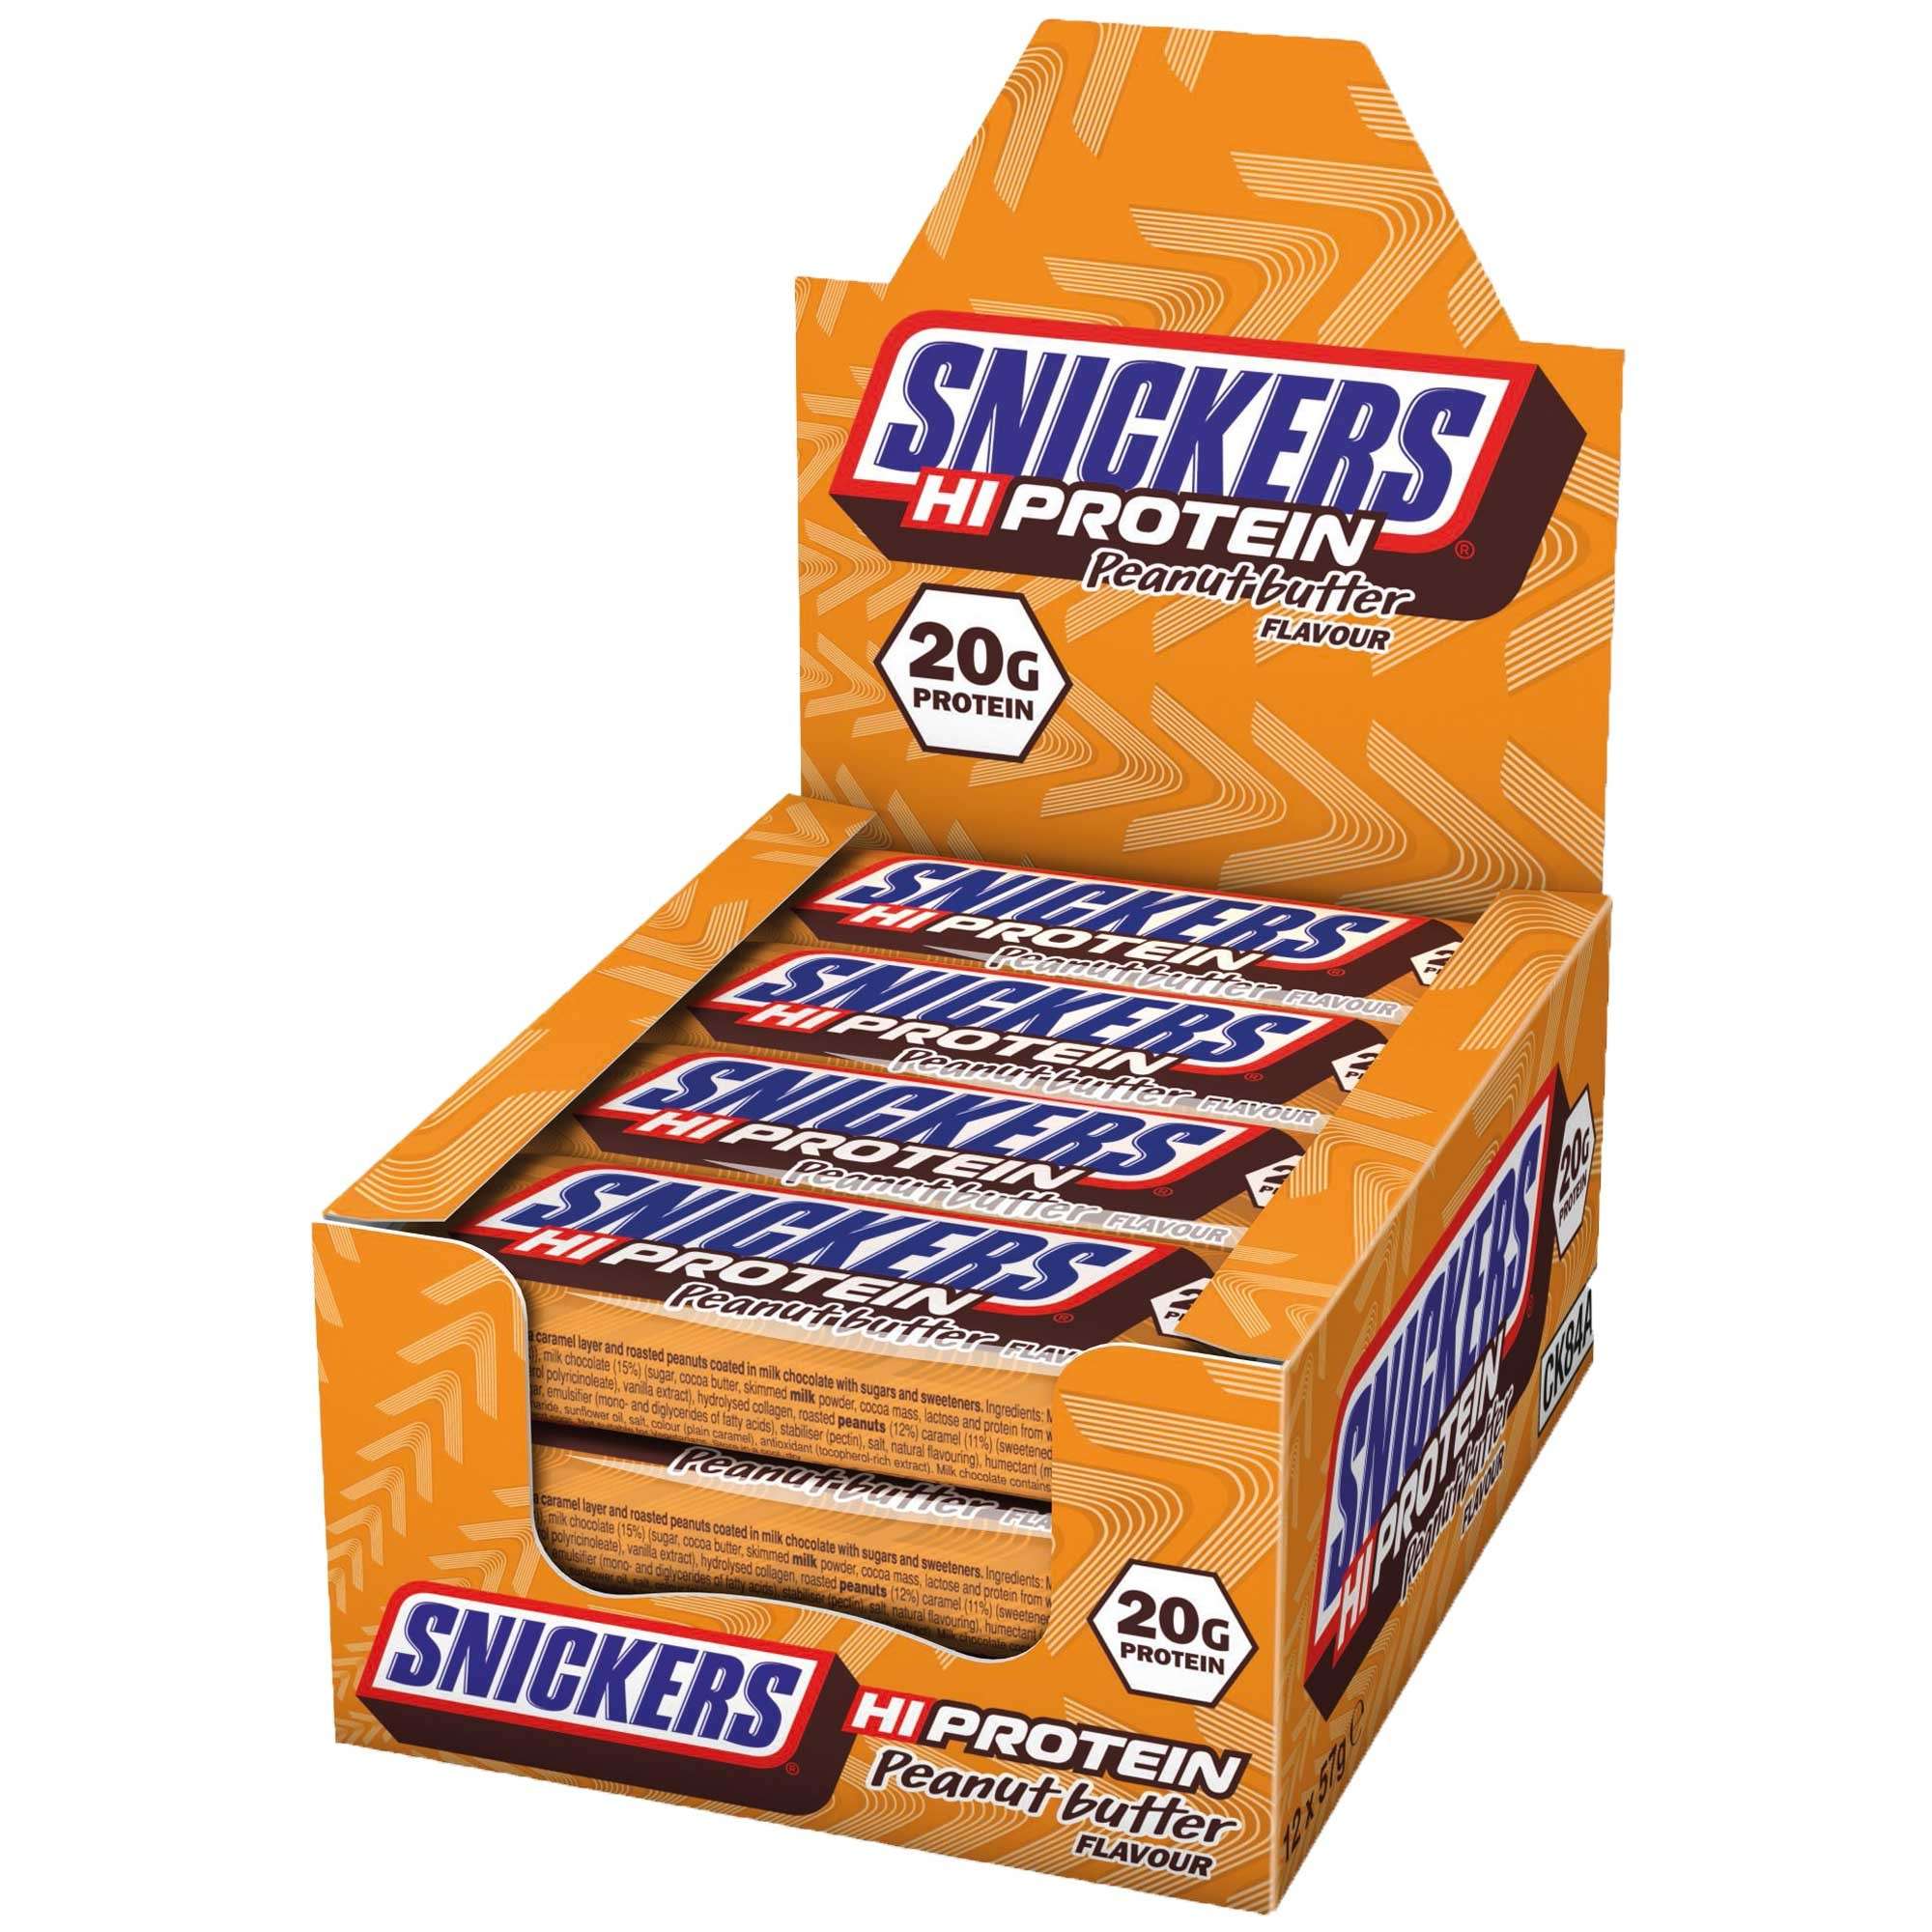 Snickers Peanut Butter Hi Protein Bars Box 12 x 57g